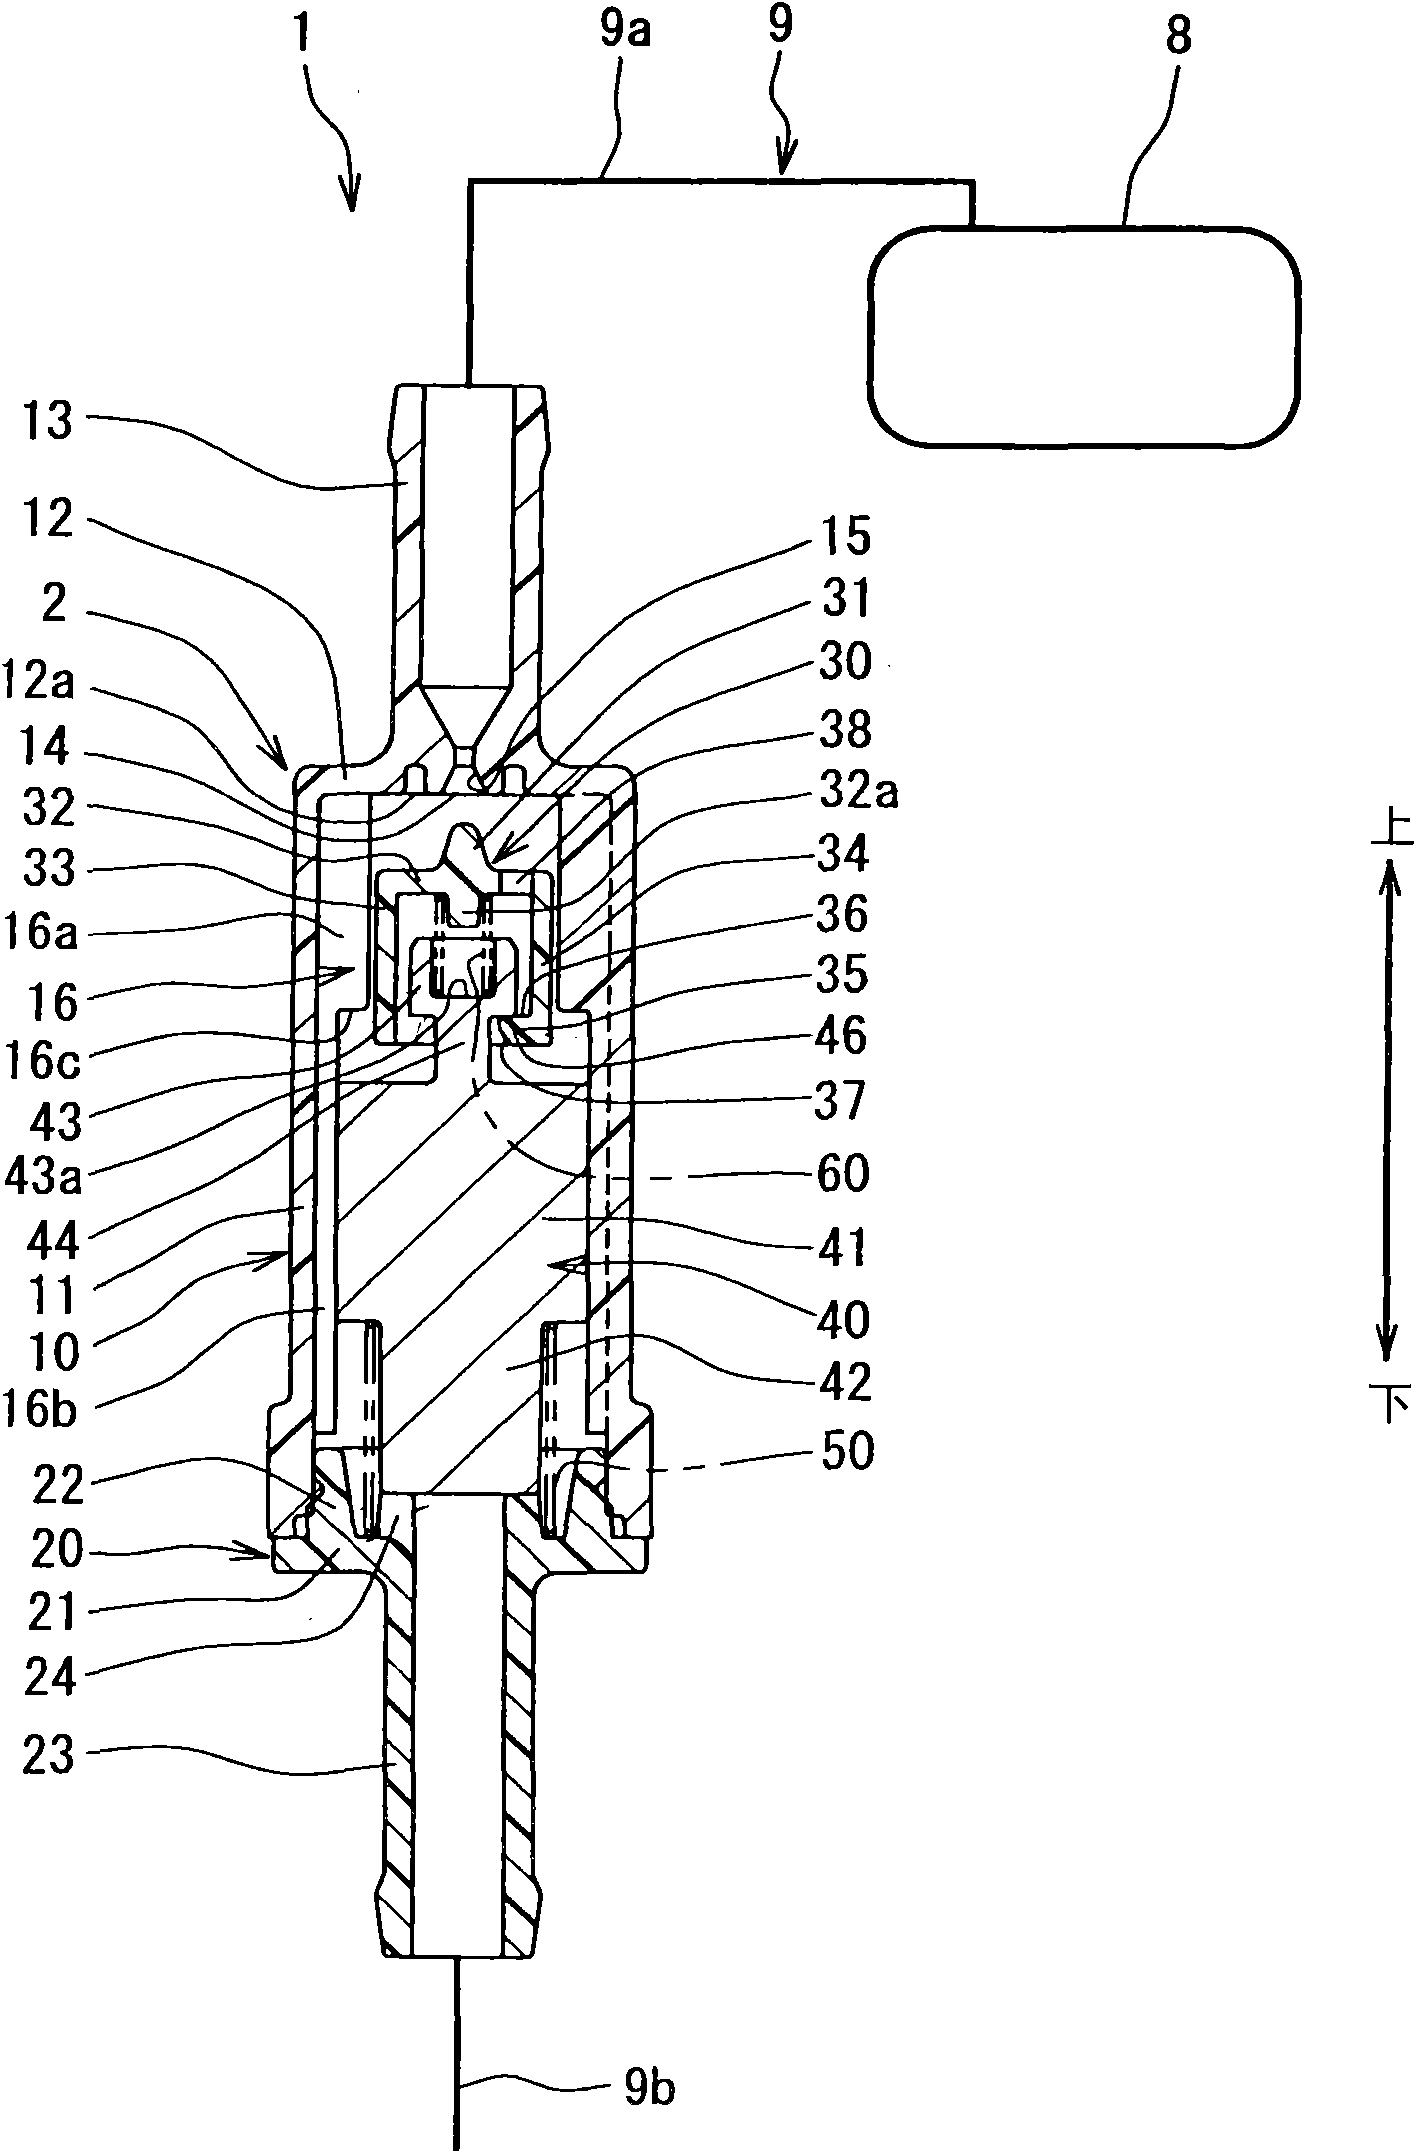 Roll-over safety valve